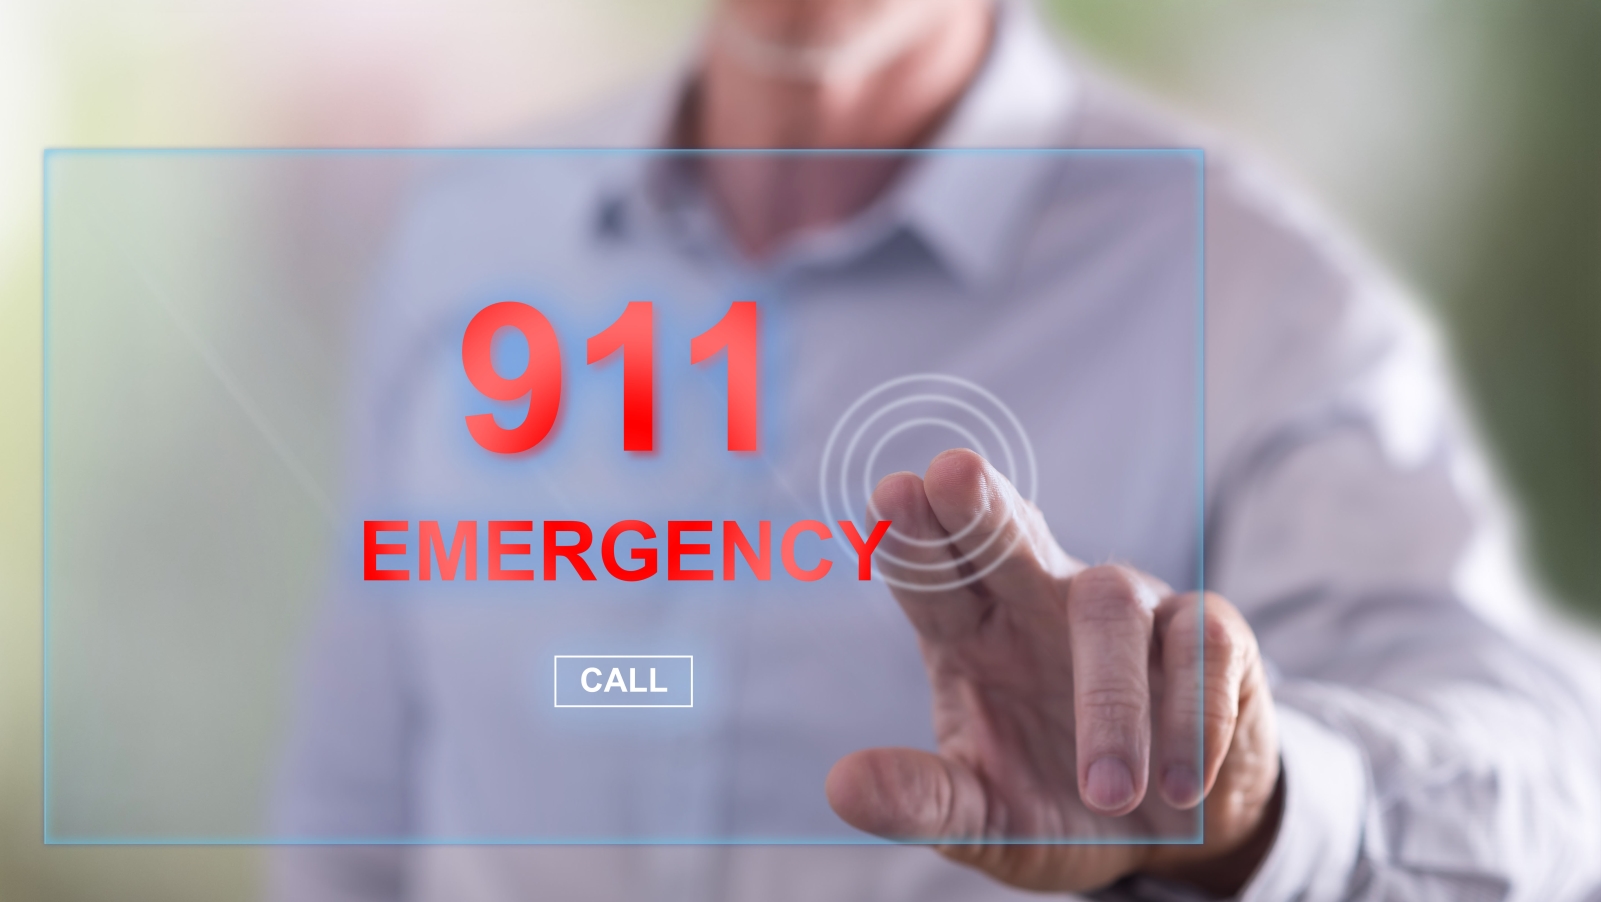 Dialing 911 nowadays reveals a plethora of lifesaving information on the caller. Photo by thodonal88 via shutterstock.com